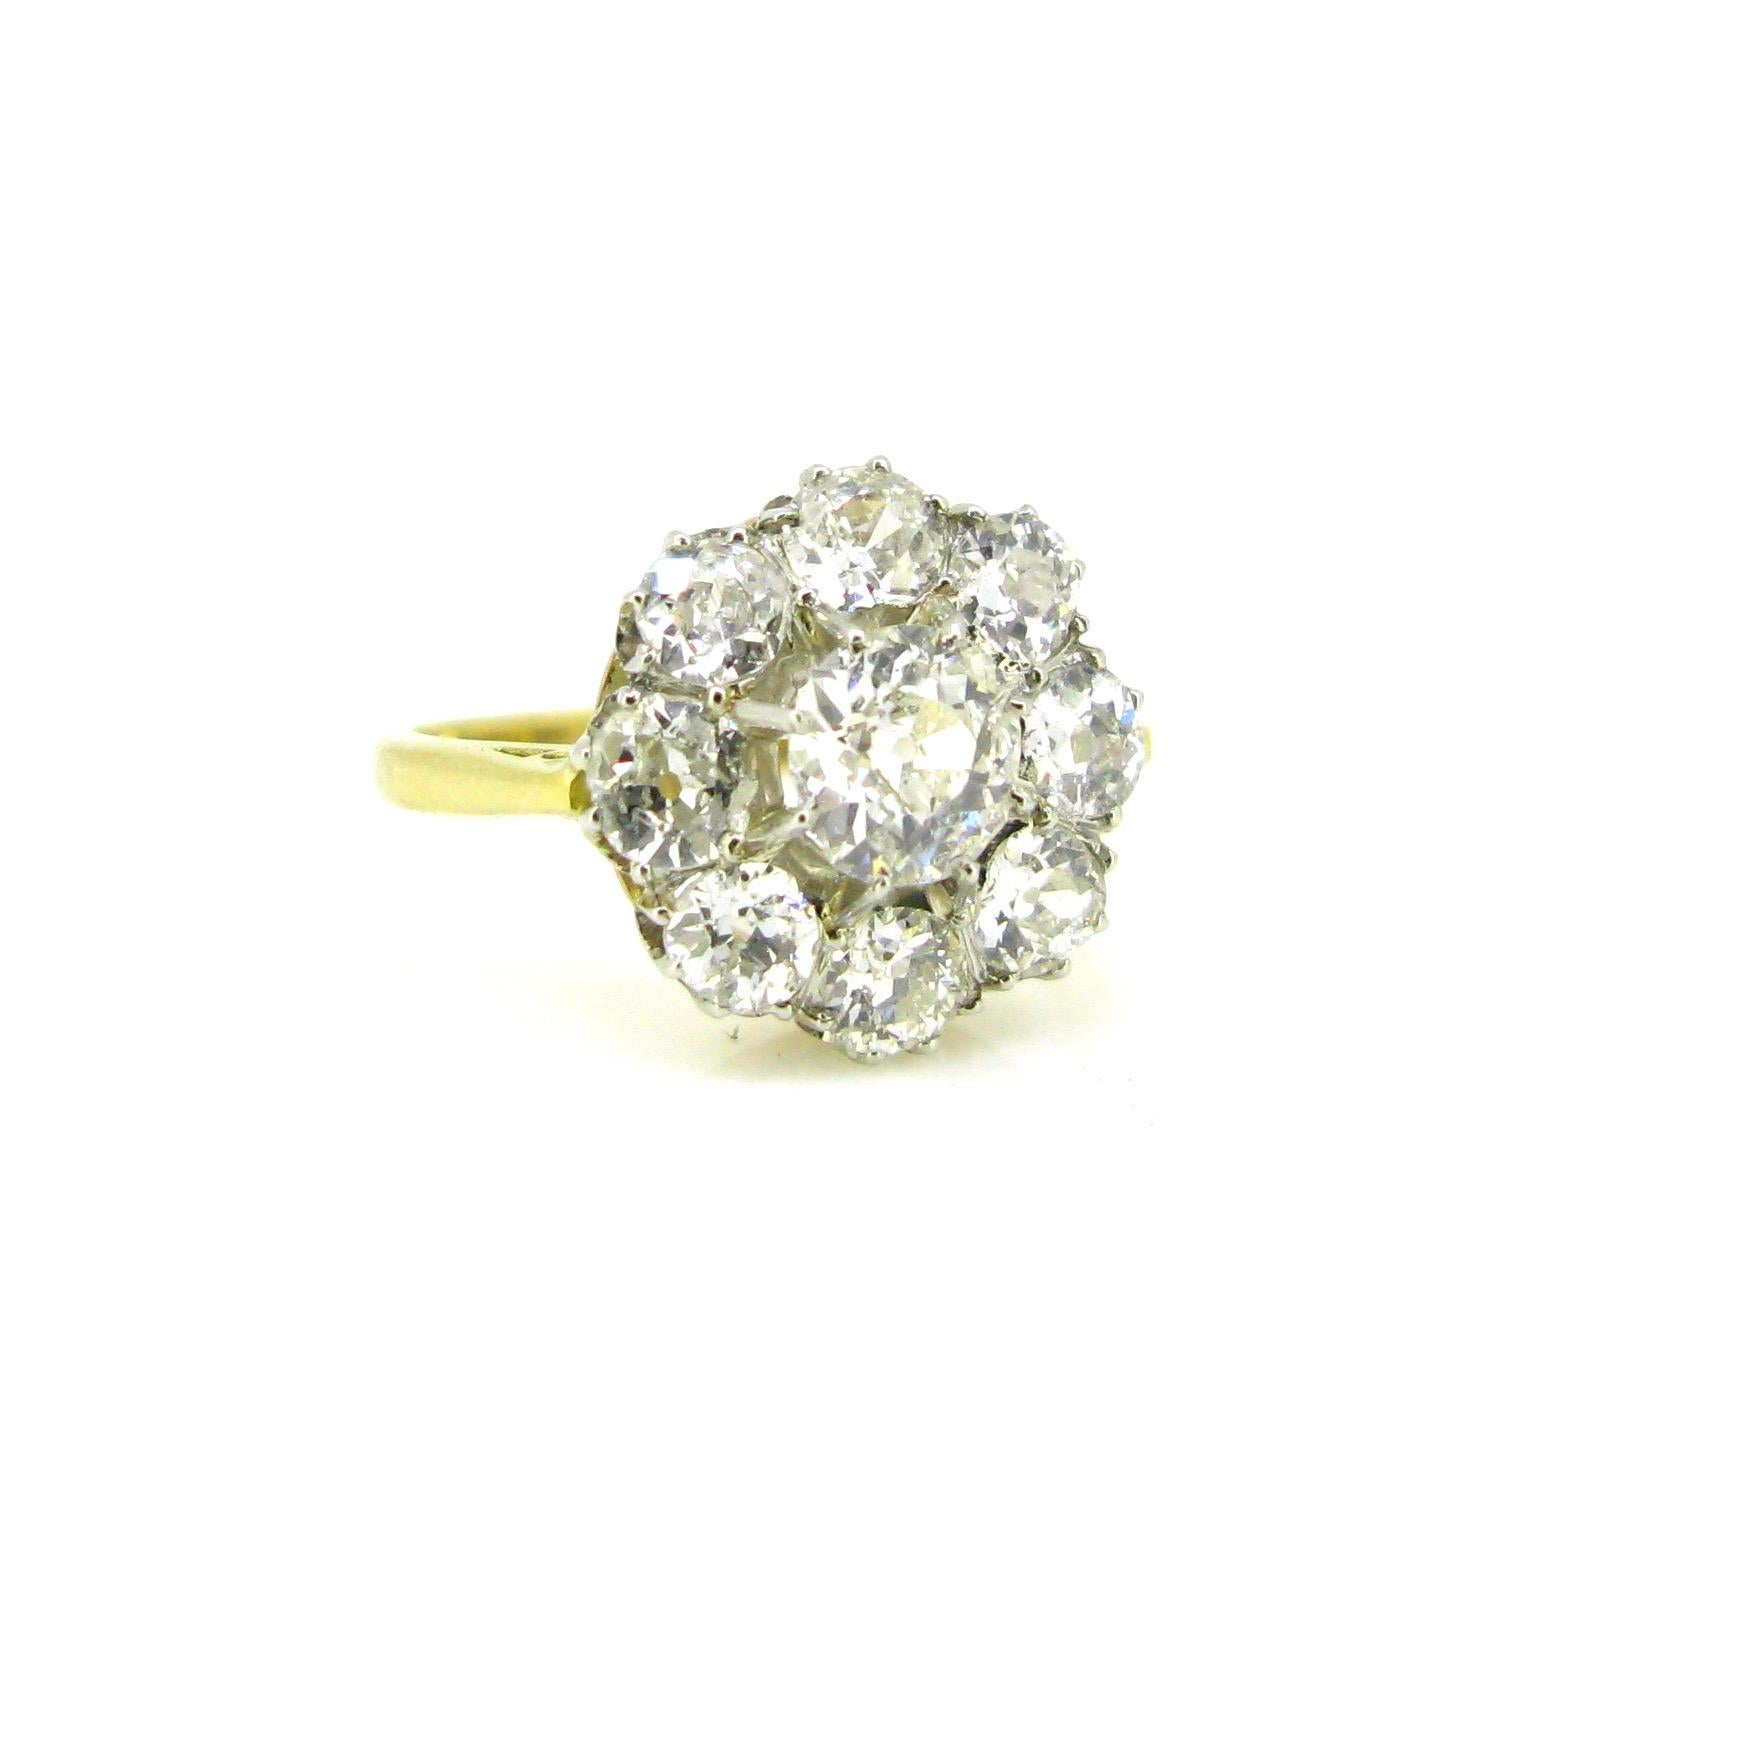 Old Mine Cut Edwardian Old Cut Diamonds Rose Yellow Gold Platinum Cluster Daisy Ring